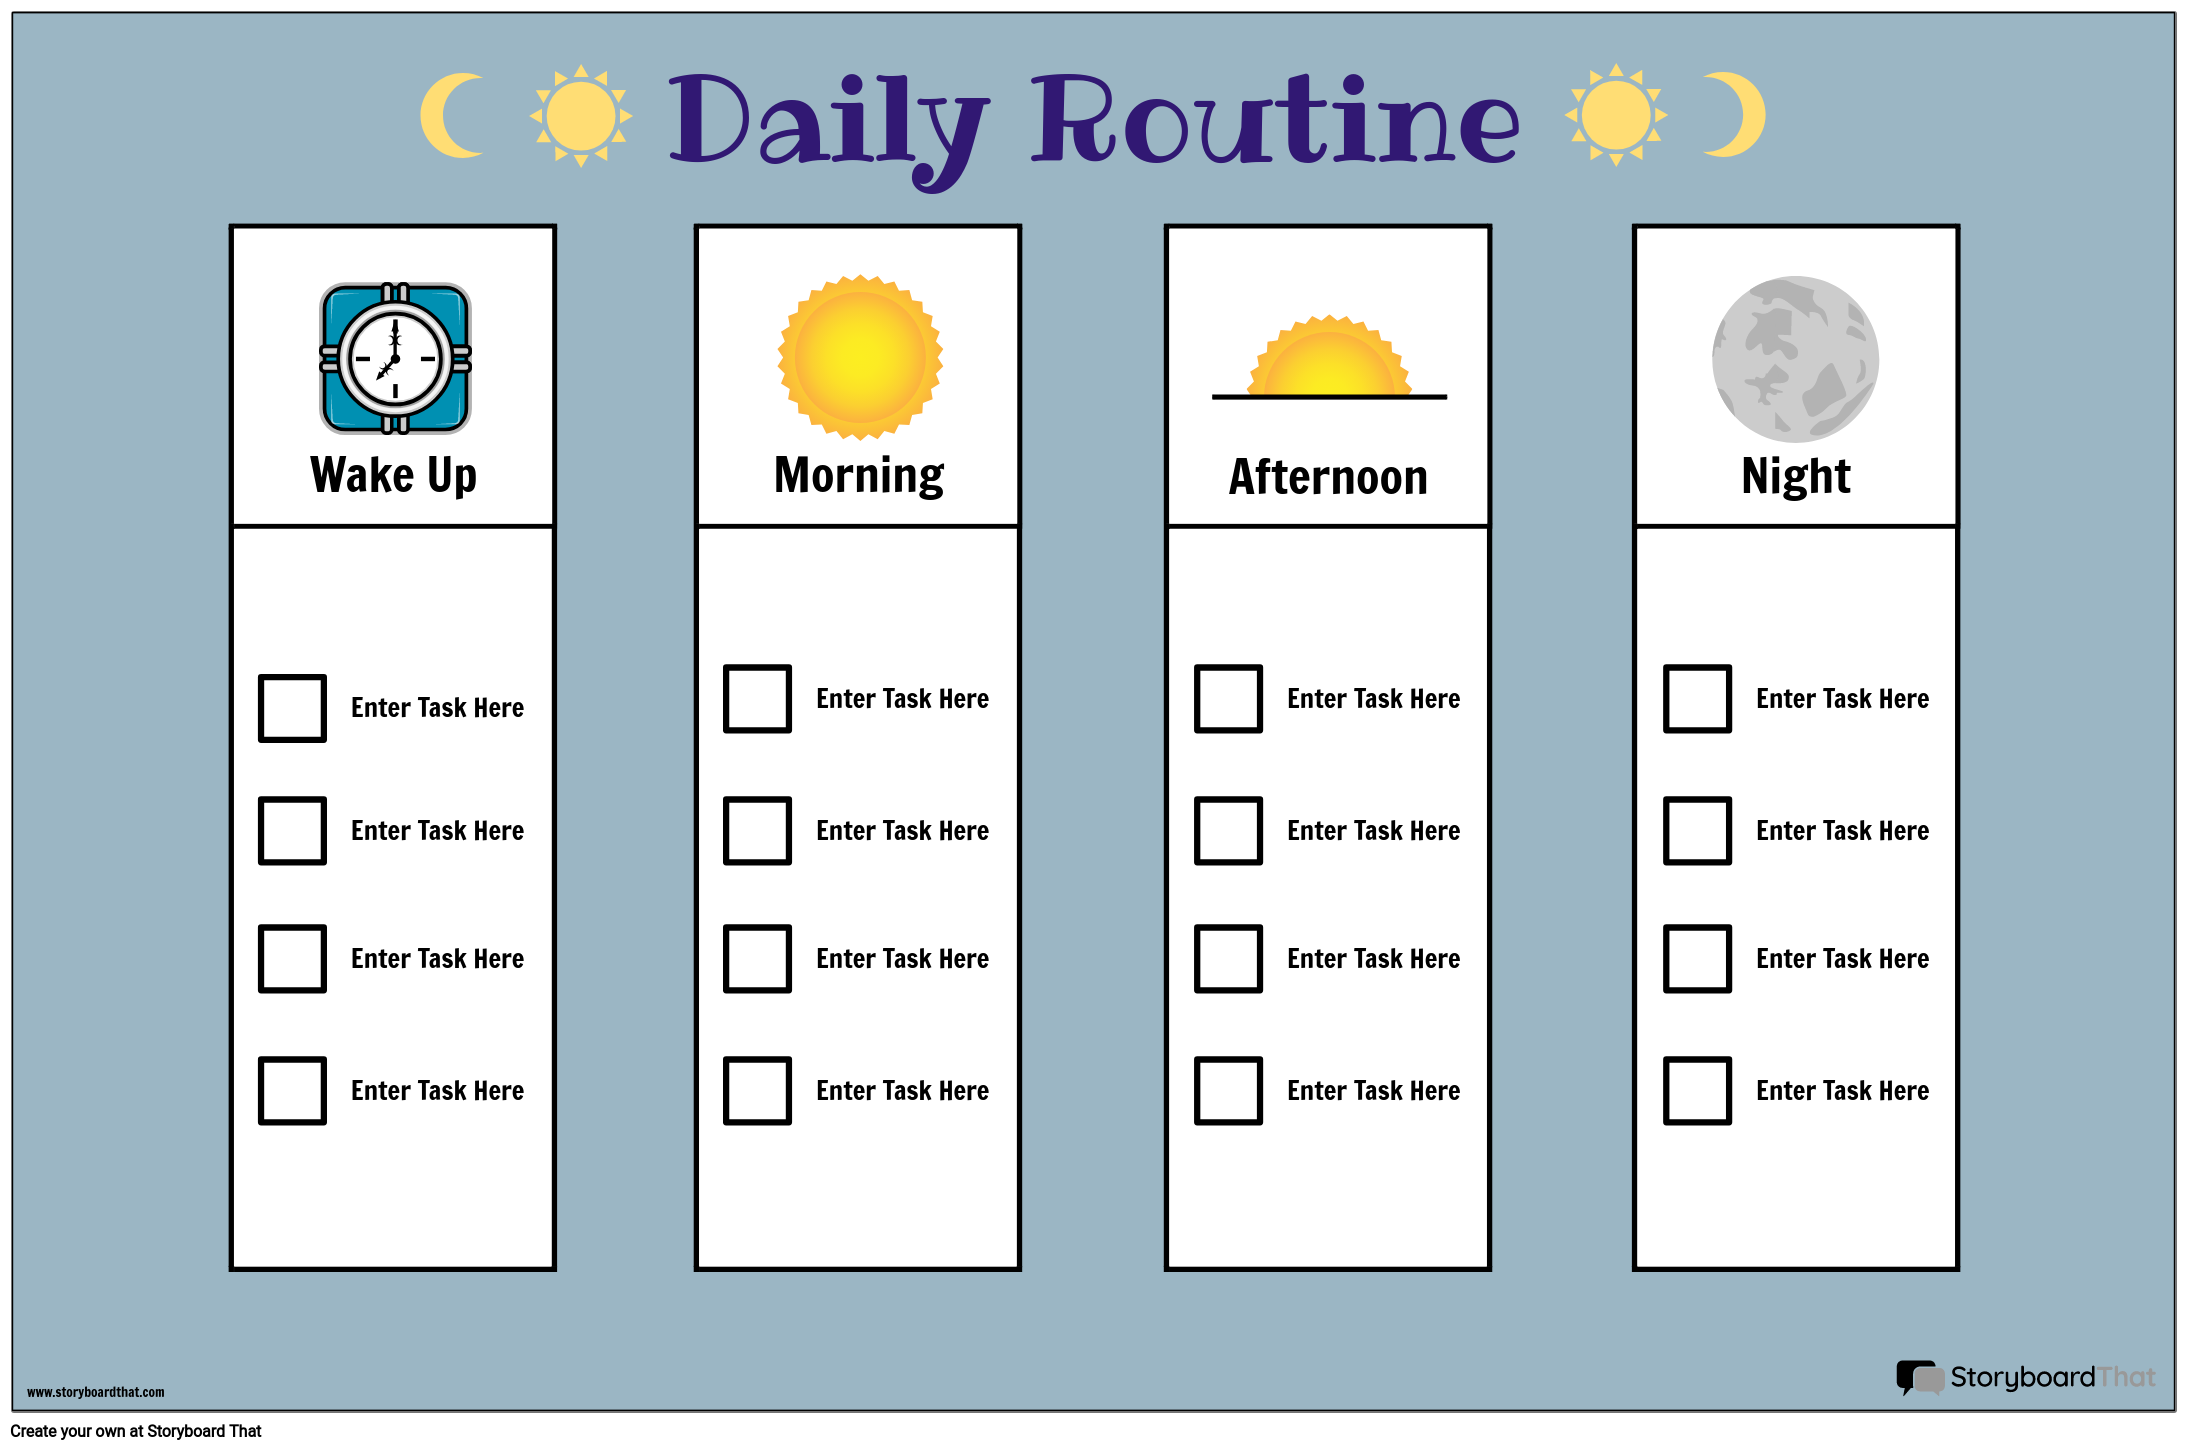 Daily Routine Chart Template — Daily Schedule Maker StoryboardThat